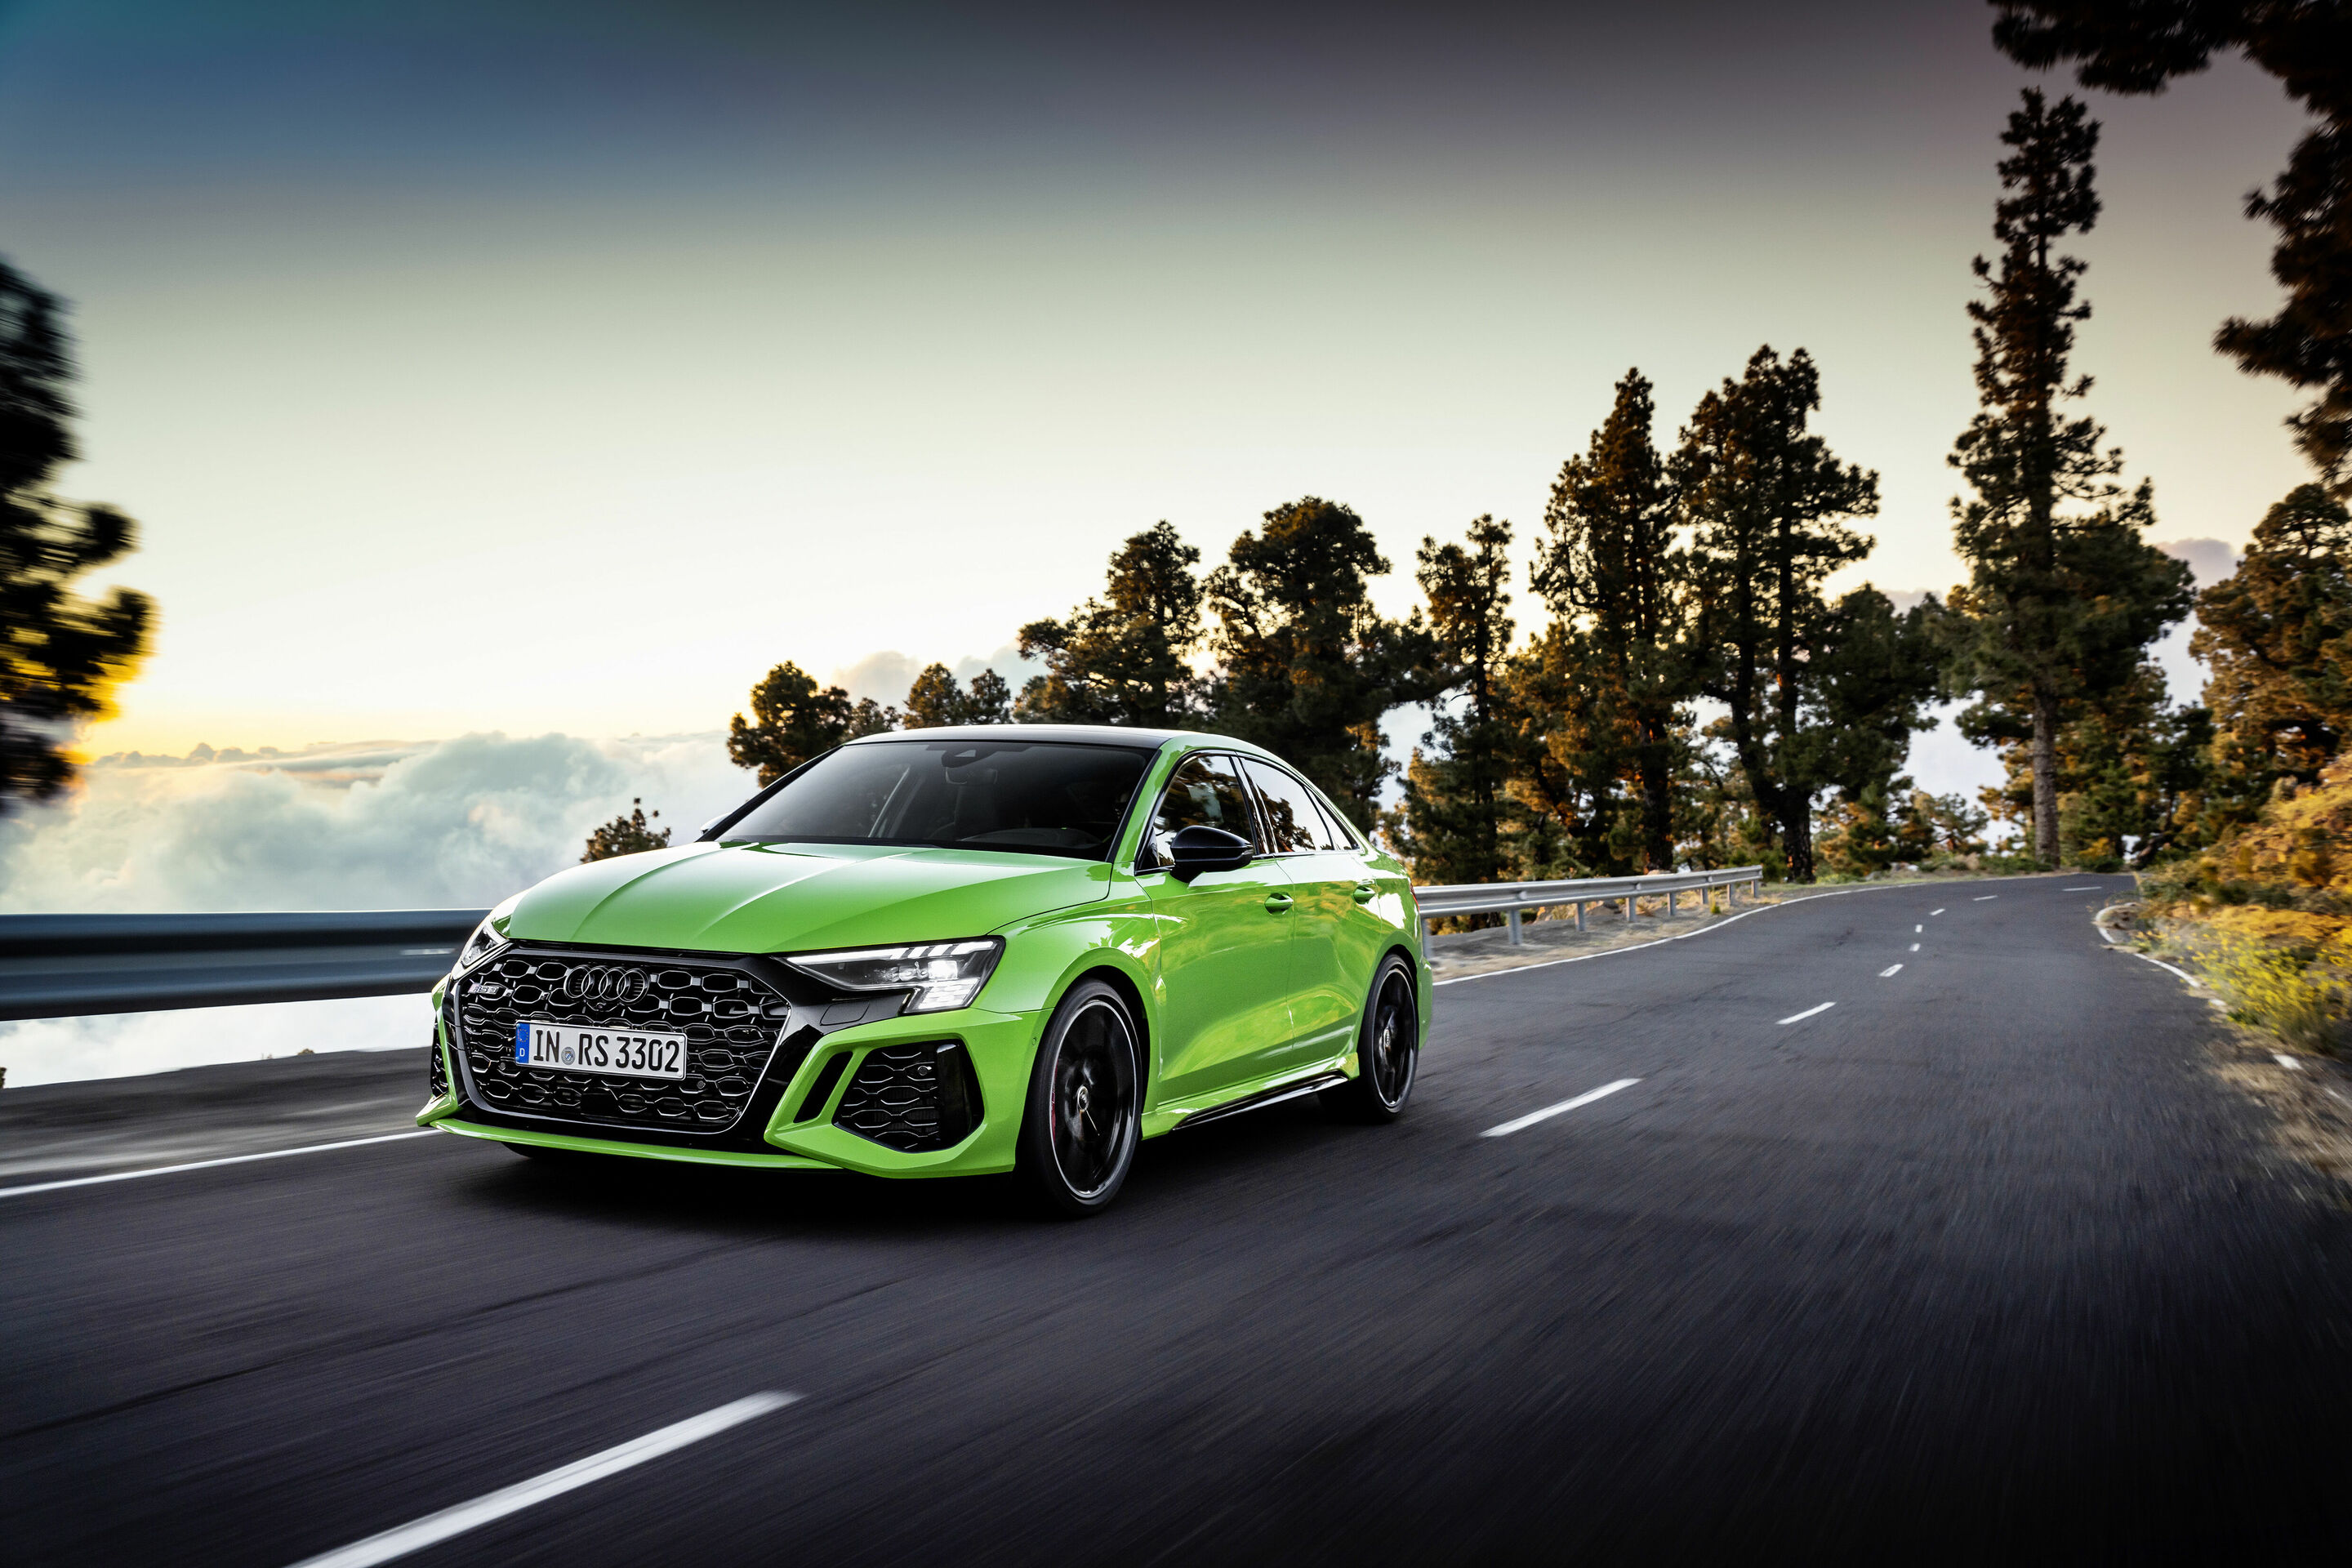 The best in its class rolling up to the starting line: New Audi RS